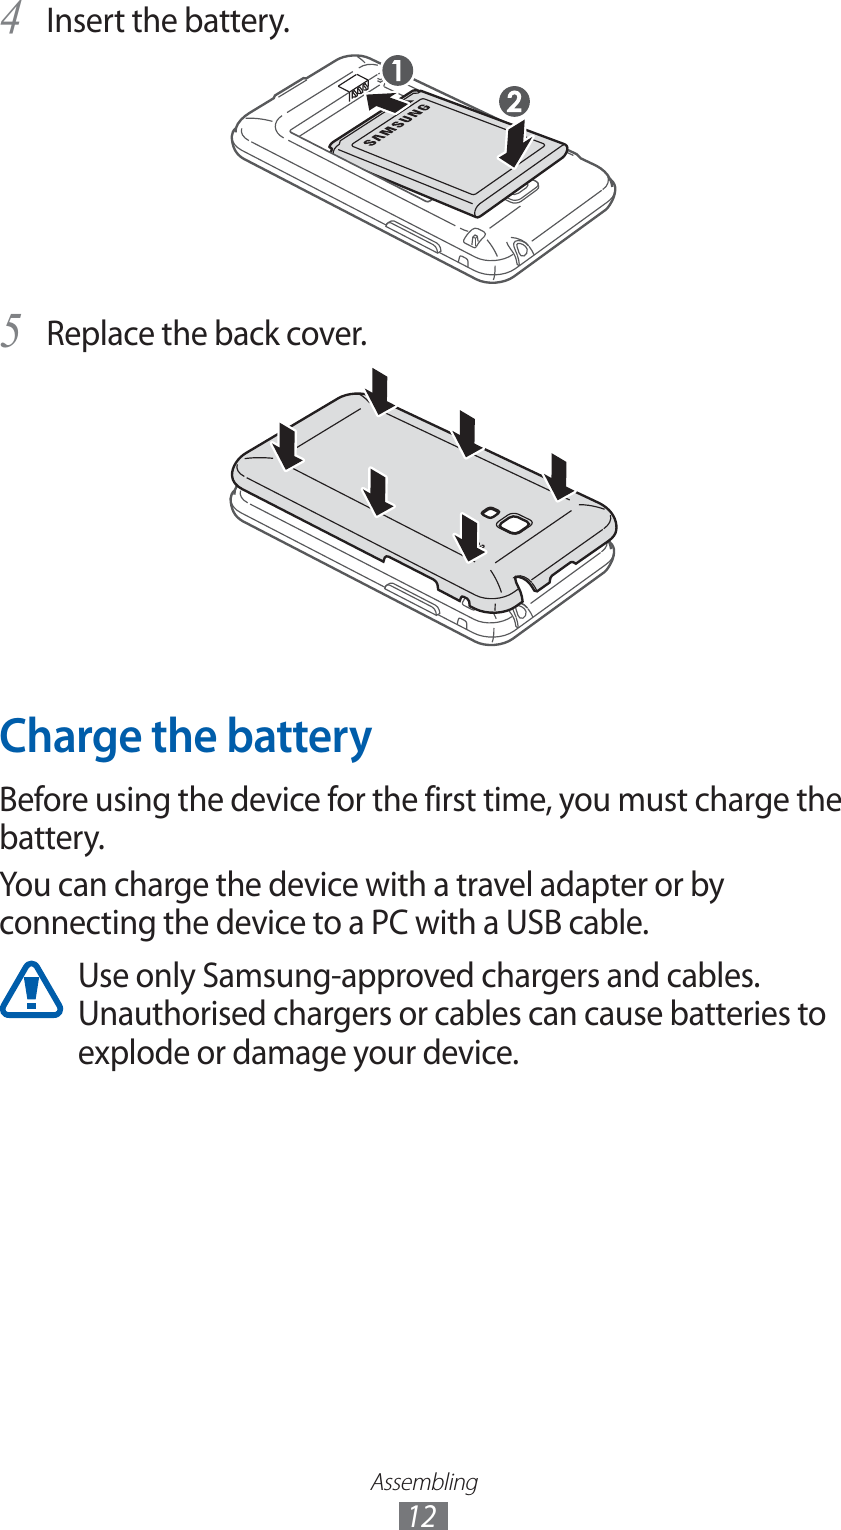 Assembling12Insert the battery.4 Replace the back cover.5 Charge the batteryBefore using the device for the first time, you must charge the battery.You can charge the device with a travel adapter or by connecting the device to a PC with a USB cable.Use only Samsung-approved chargers and cables. Unauthorised chargers or cables can cause batteries to explode or damage your device.